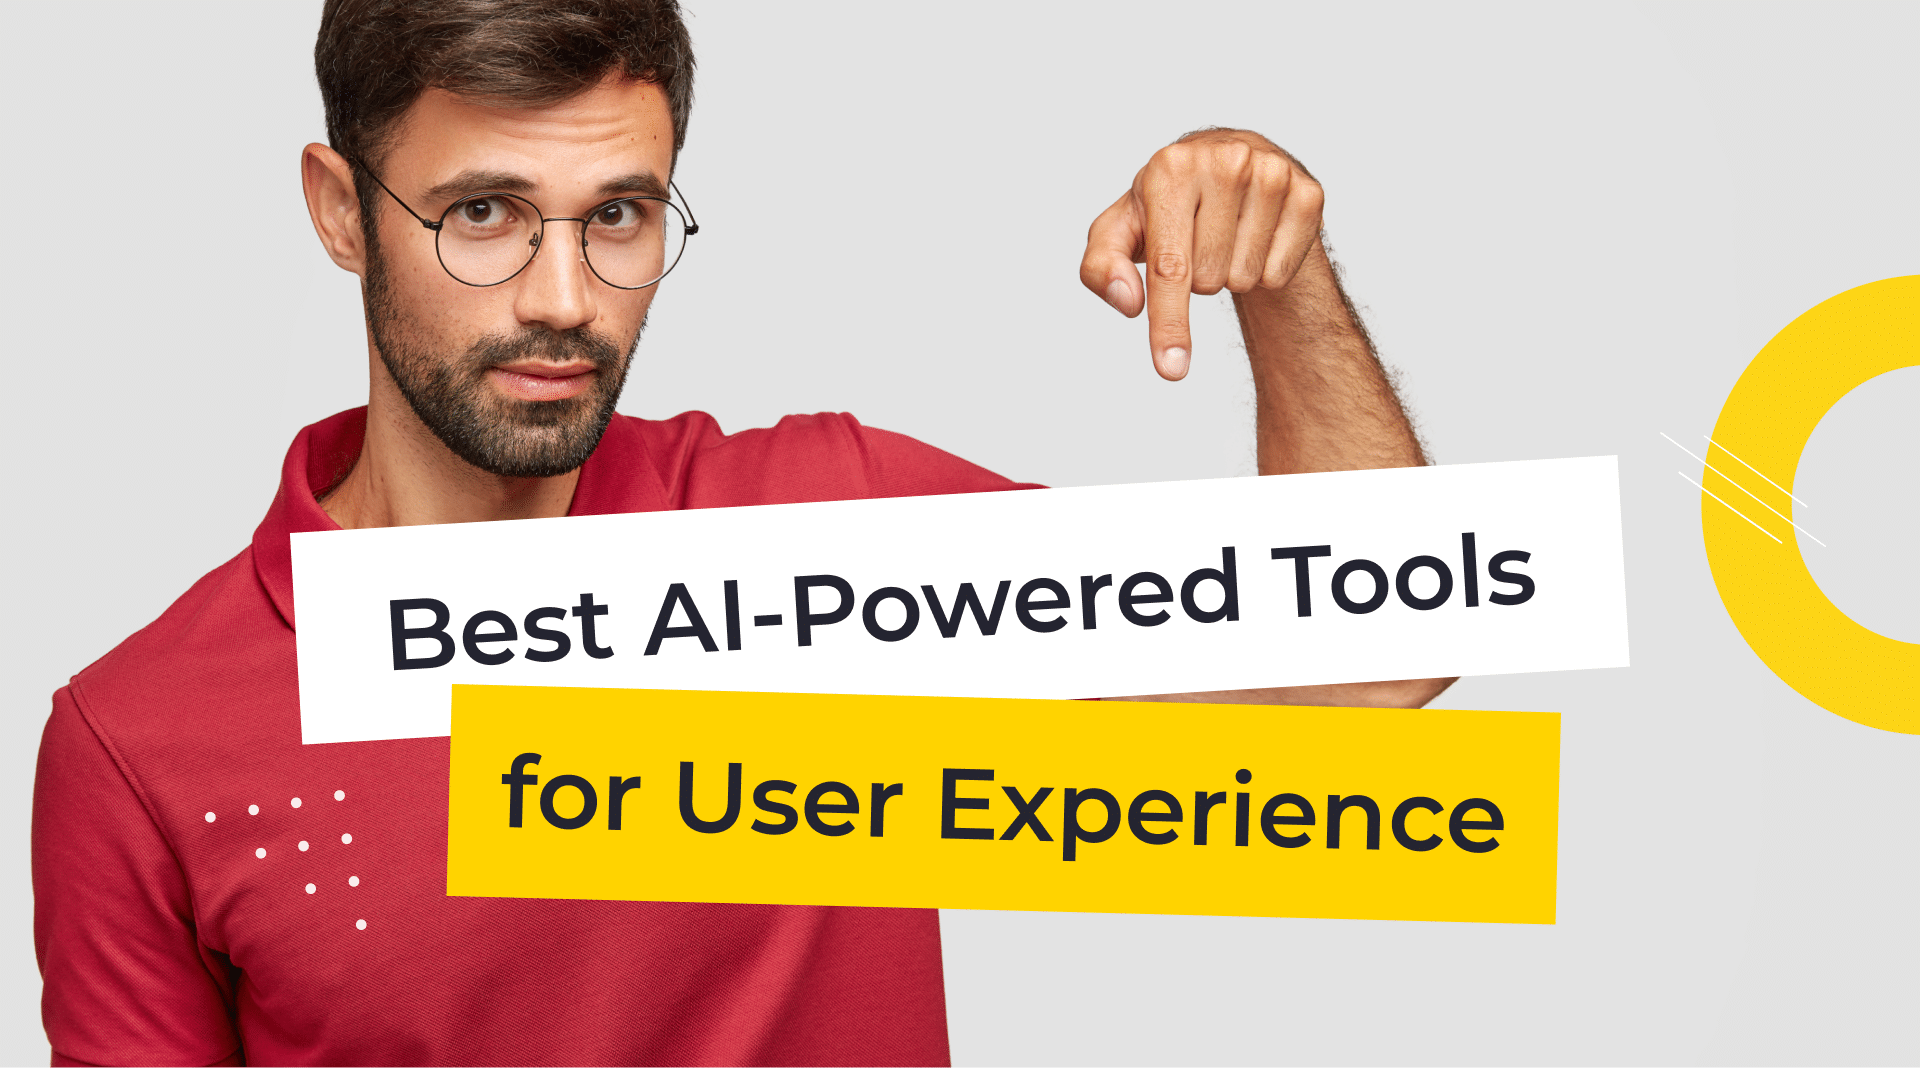 14 AI-Powered Tools To Improve Your User Experience And Sales